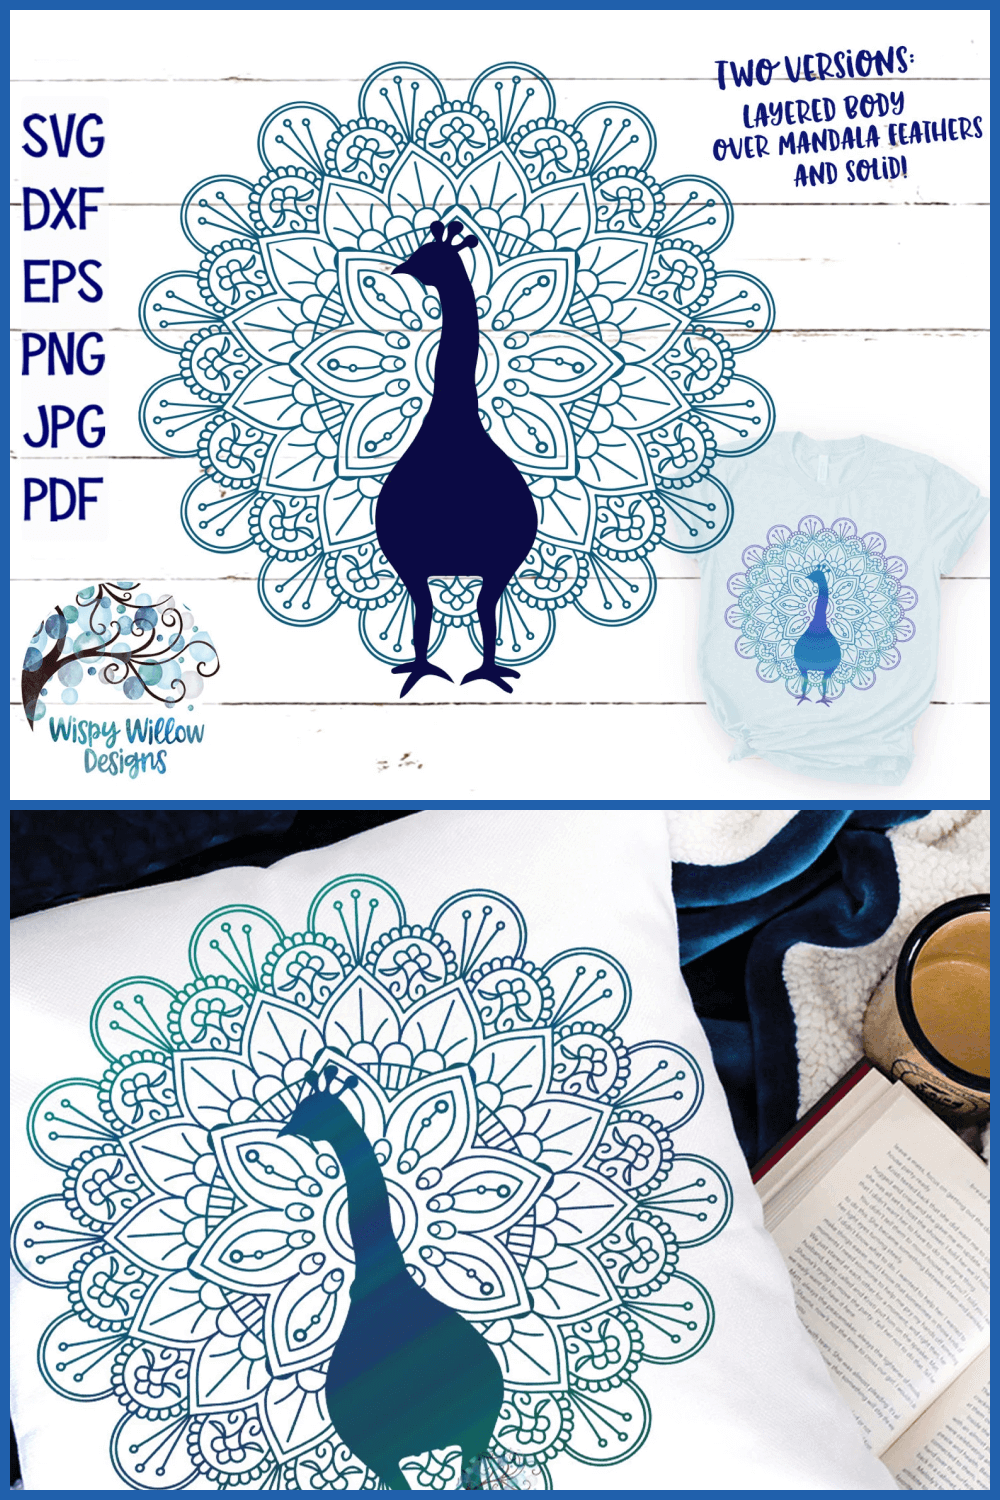 Examples of using the image of a blue peacock.